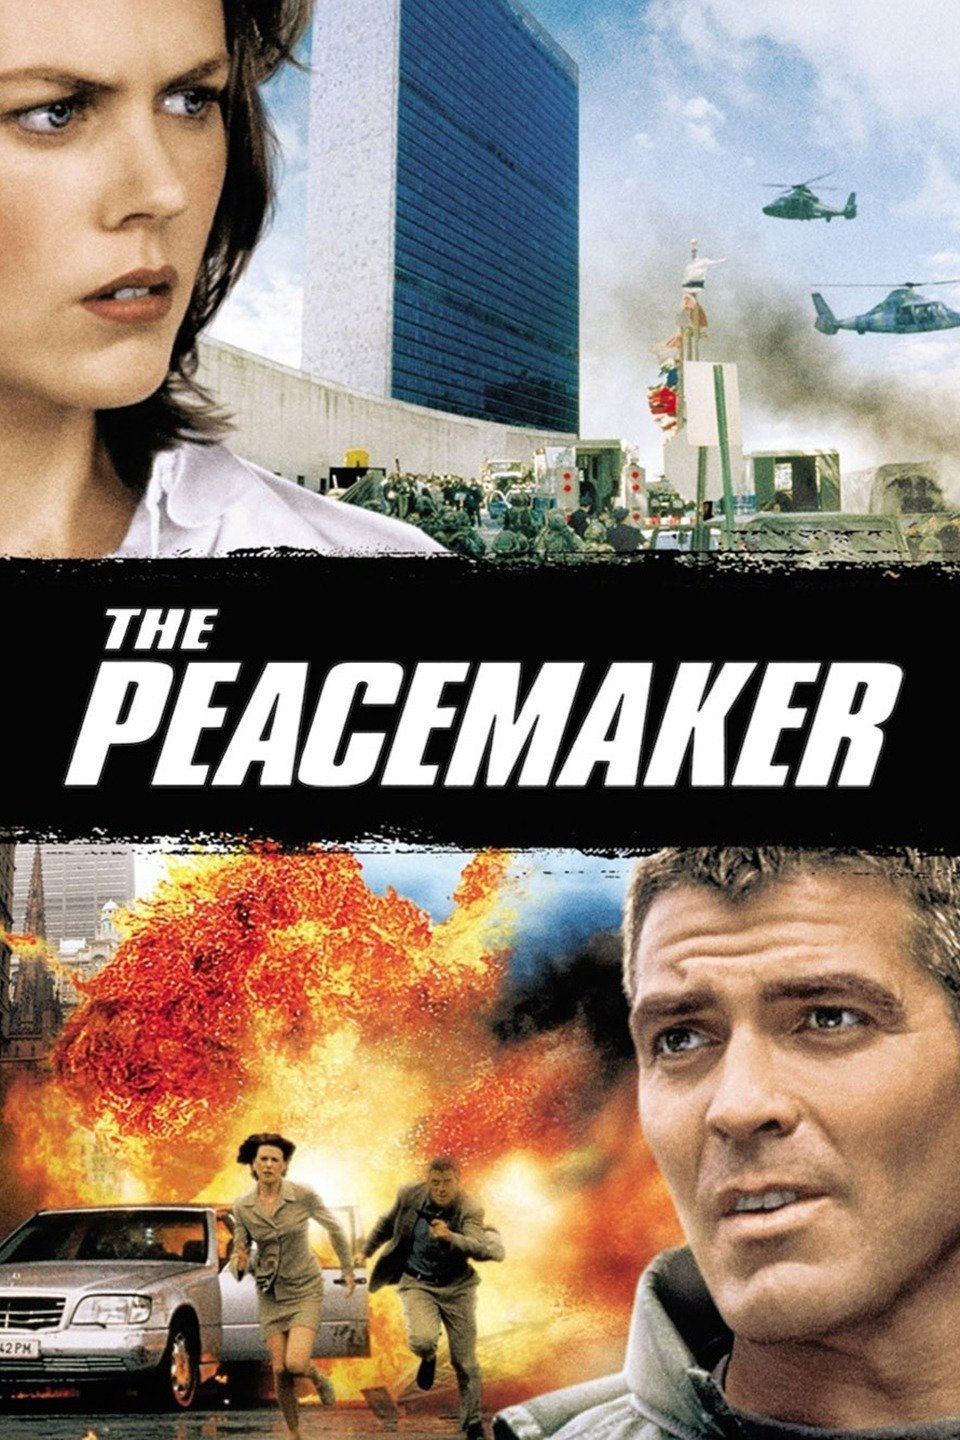 The Peacemaker (1997) Hindi Dubbed